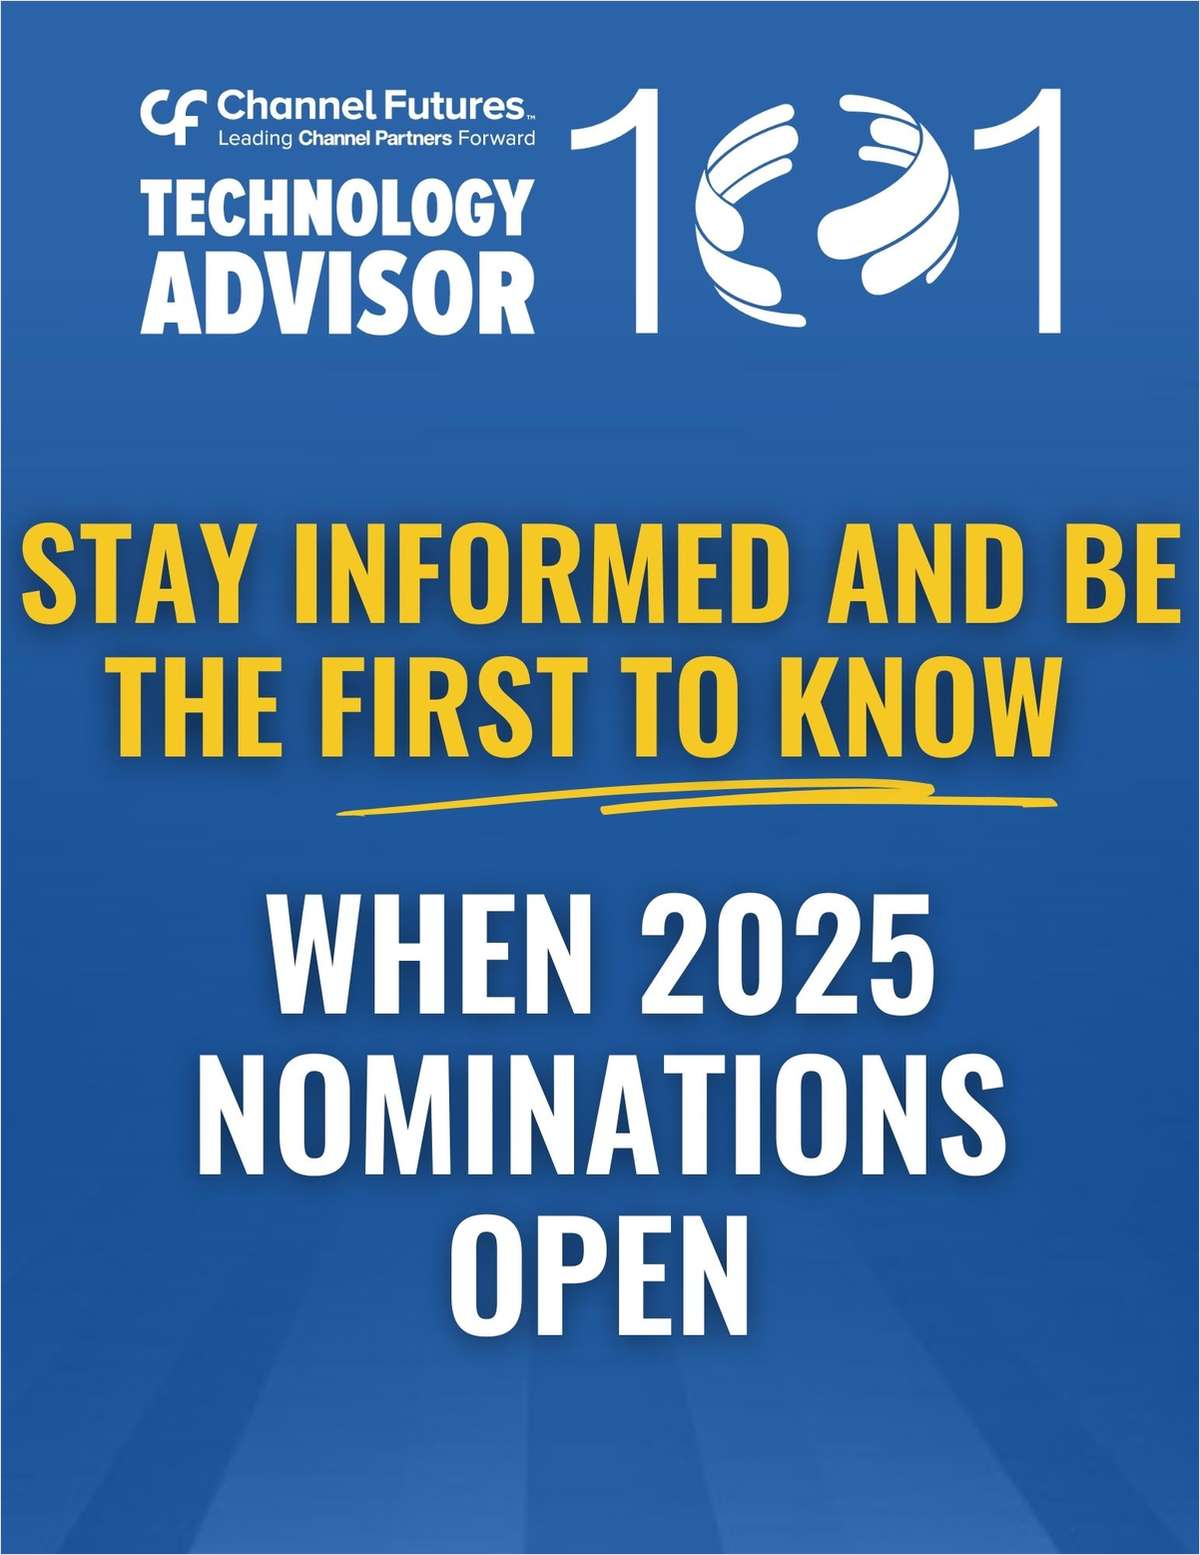 2025 Technology Advisor 101 Nominations - Get Notified